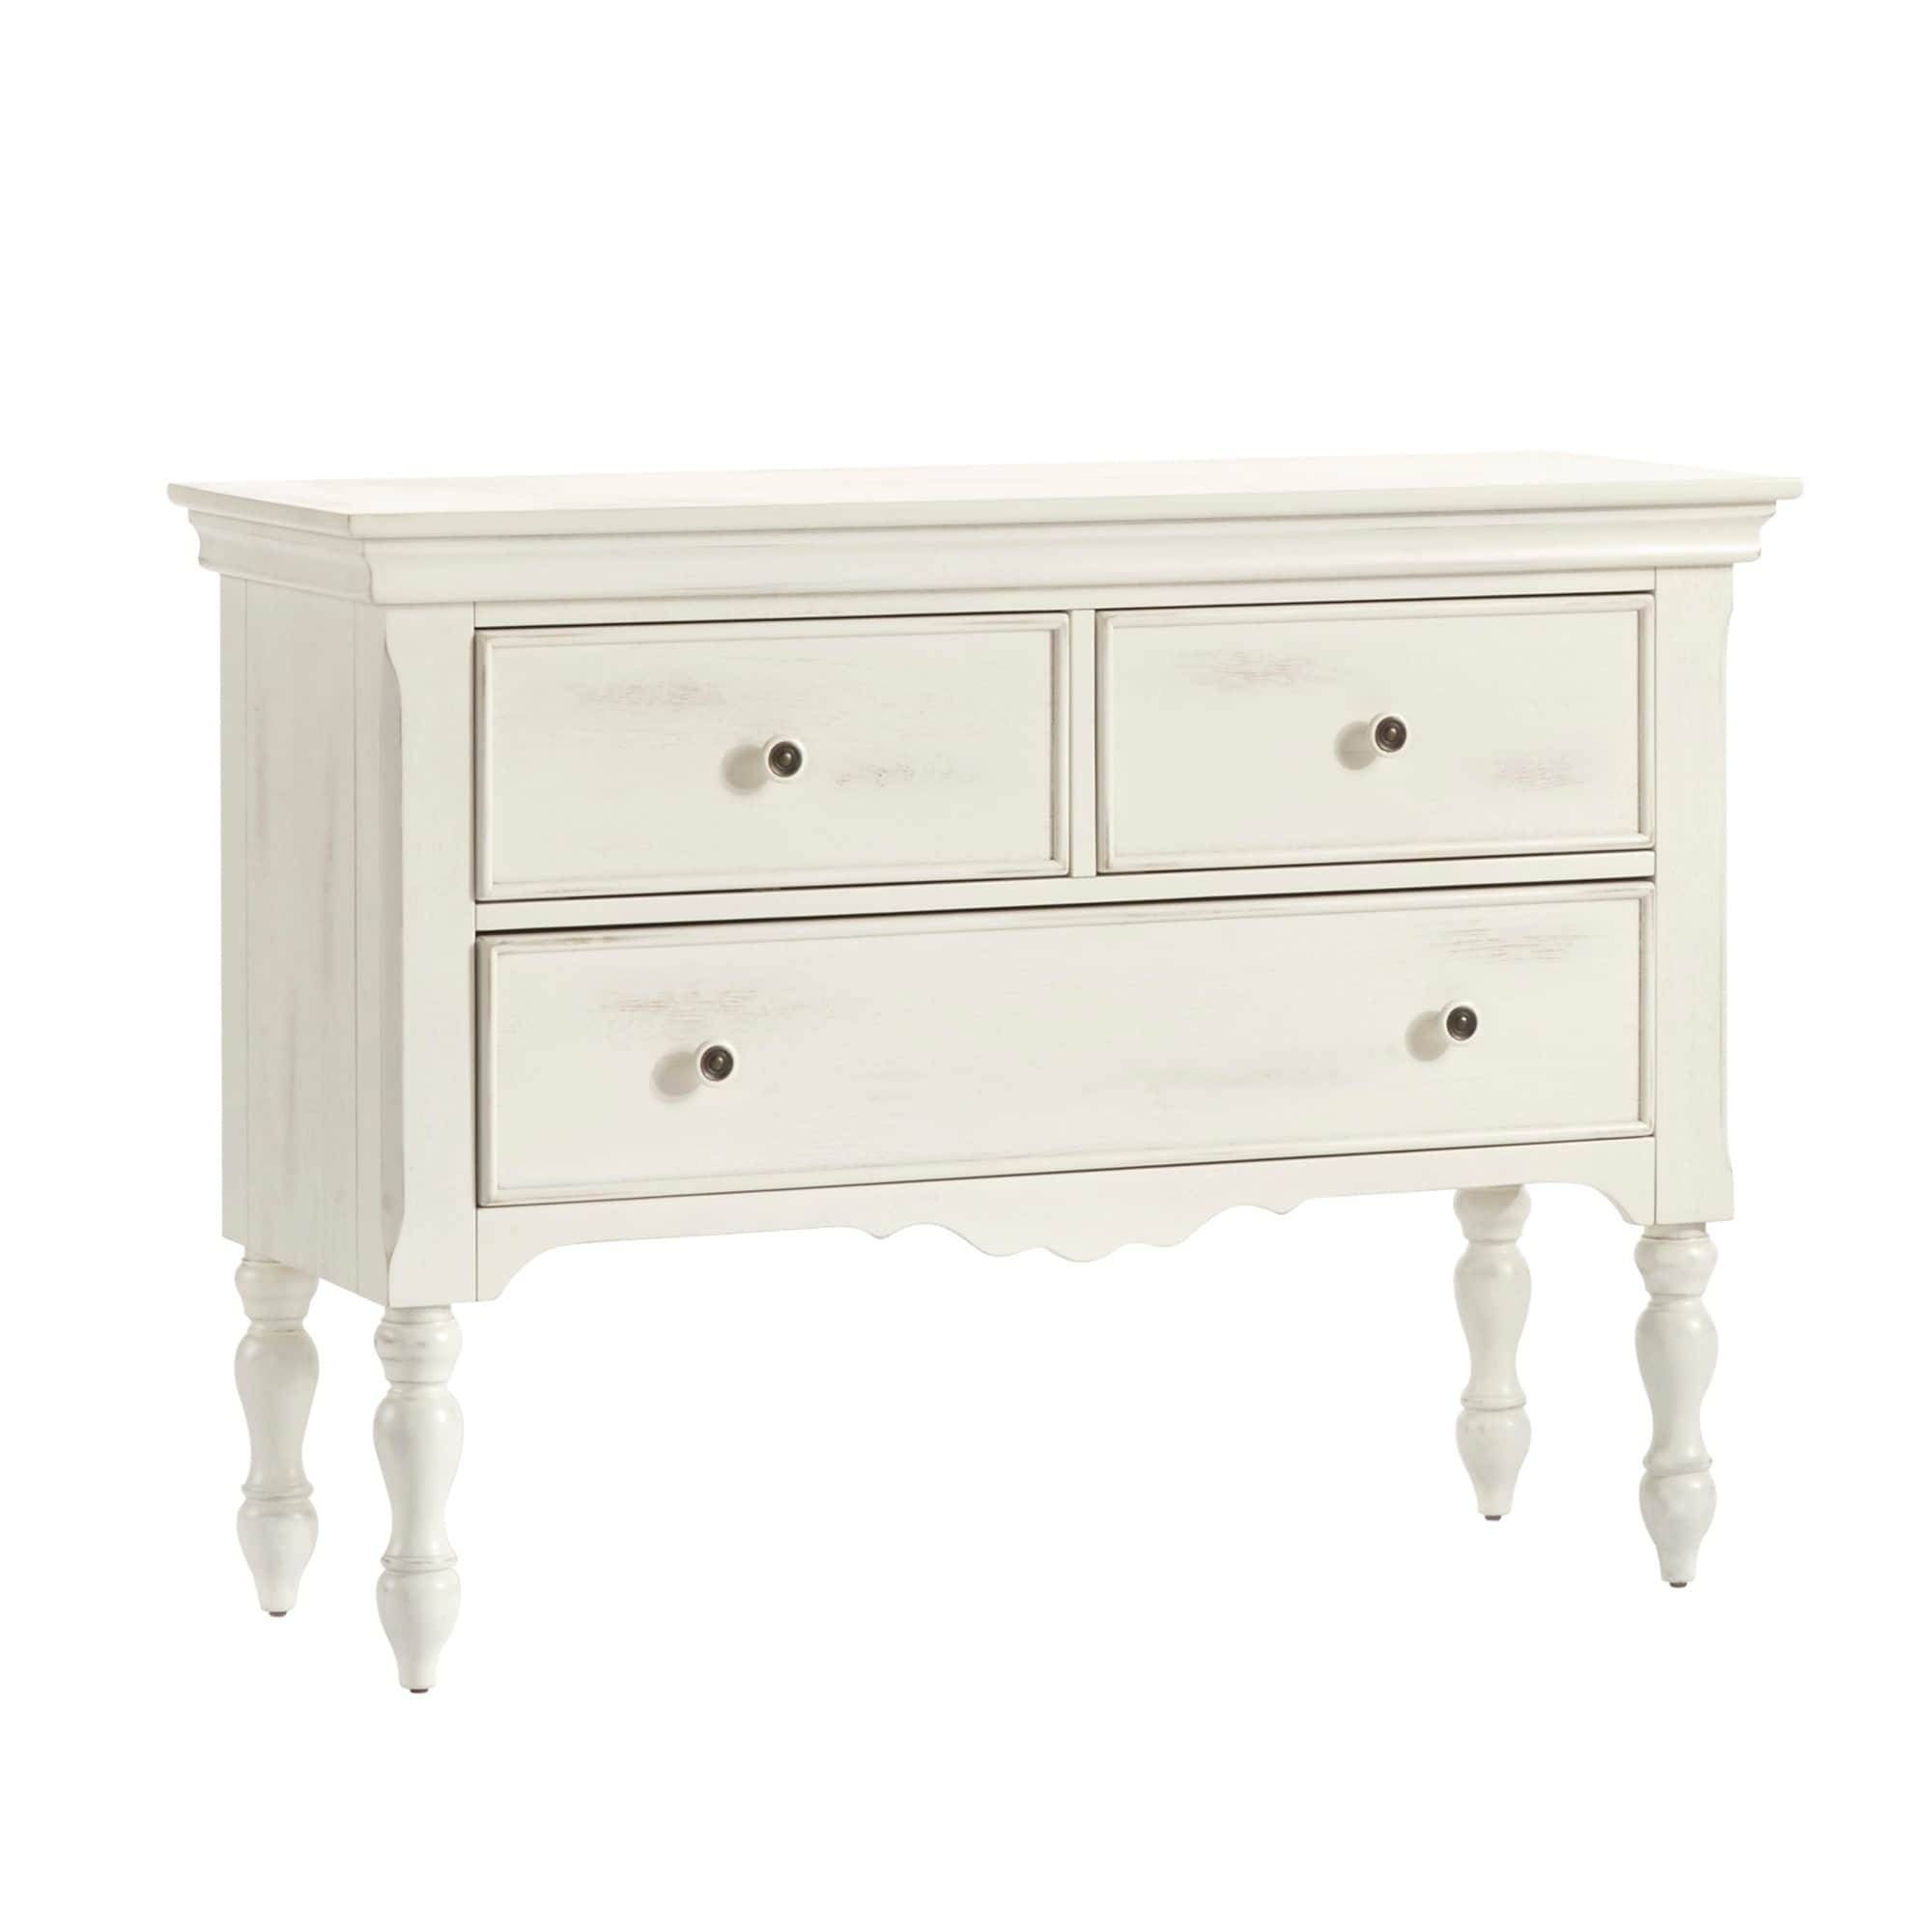 Mckay Country Antique White Buffet Storage Serverinspire Q Intended For Antique White Sideboards (View 7 of 15)